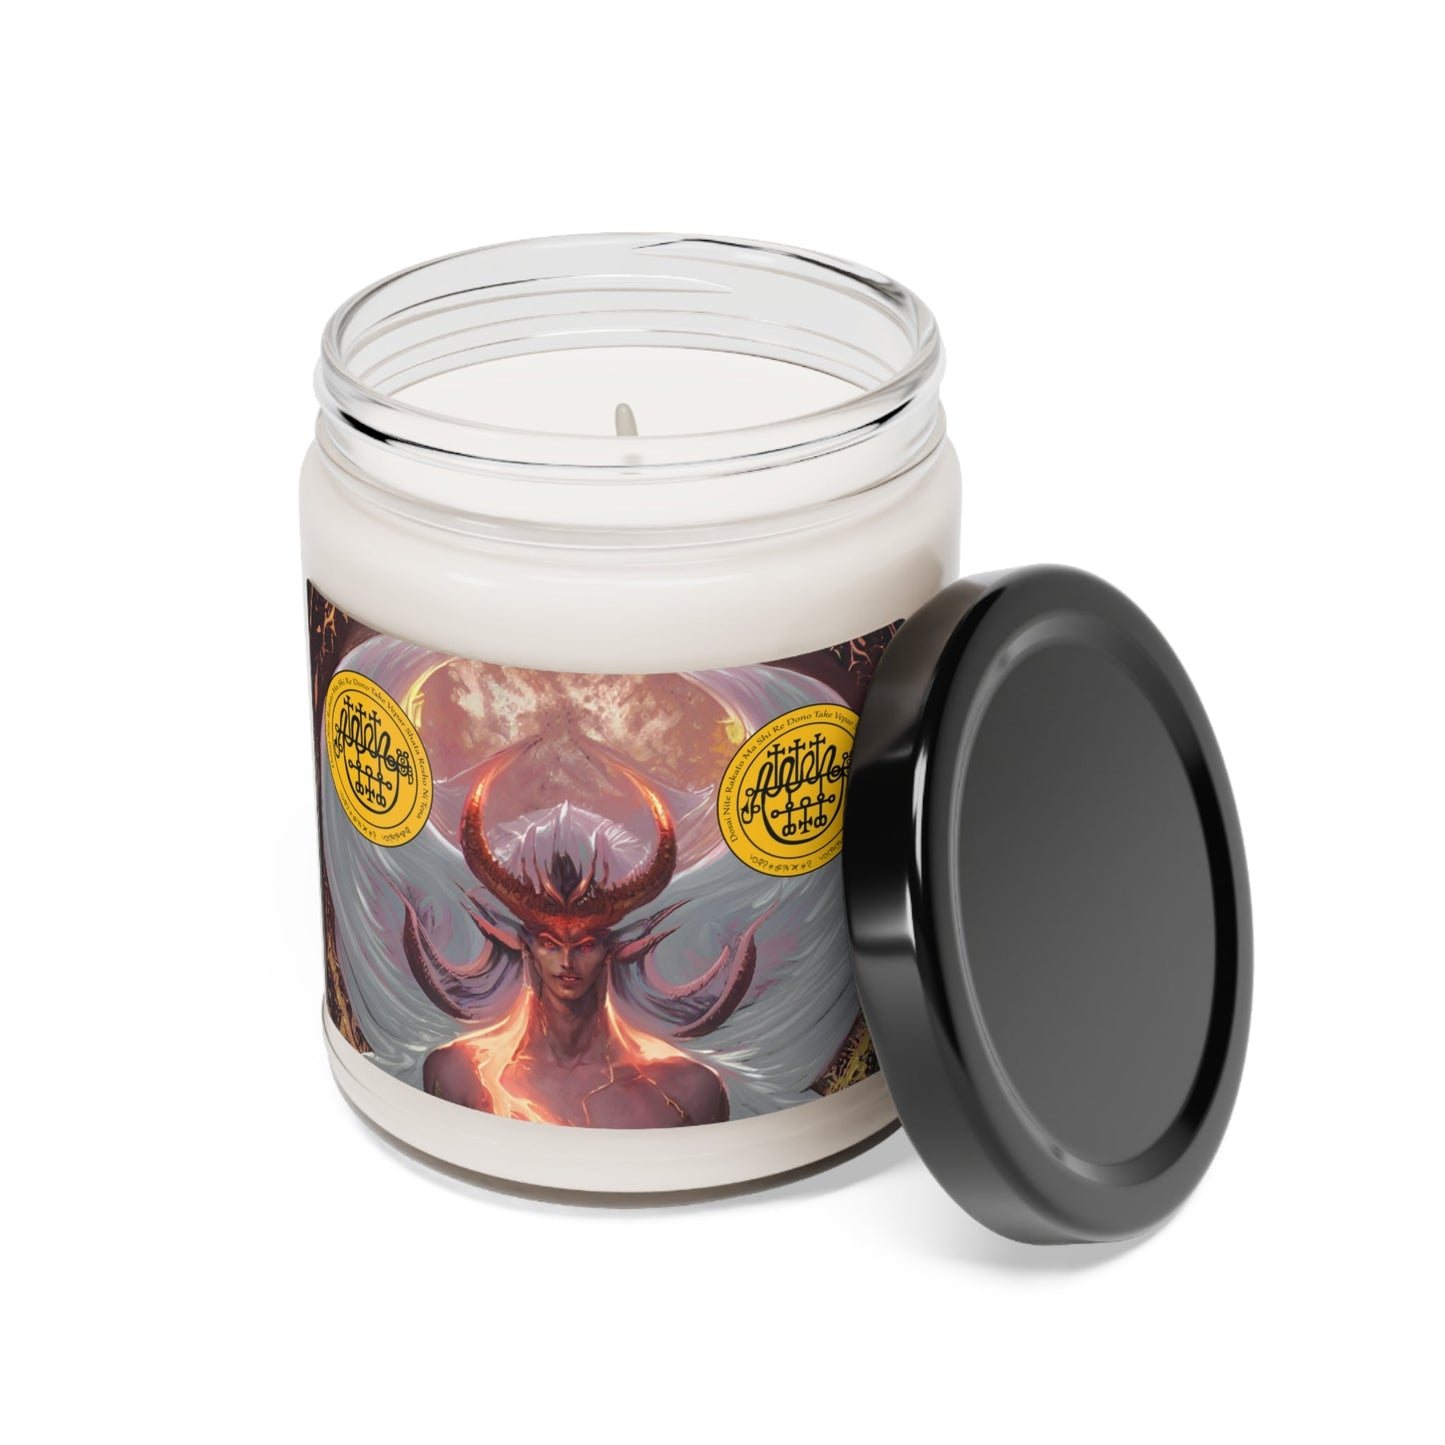 Demon-Vepar-Altar-Scented-Soy-Candle-for-offerings-rituals-initiations-o-praying-and-medtation-2